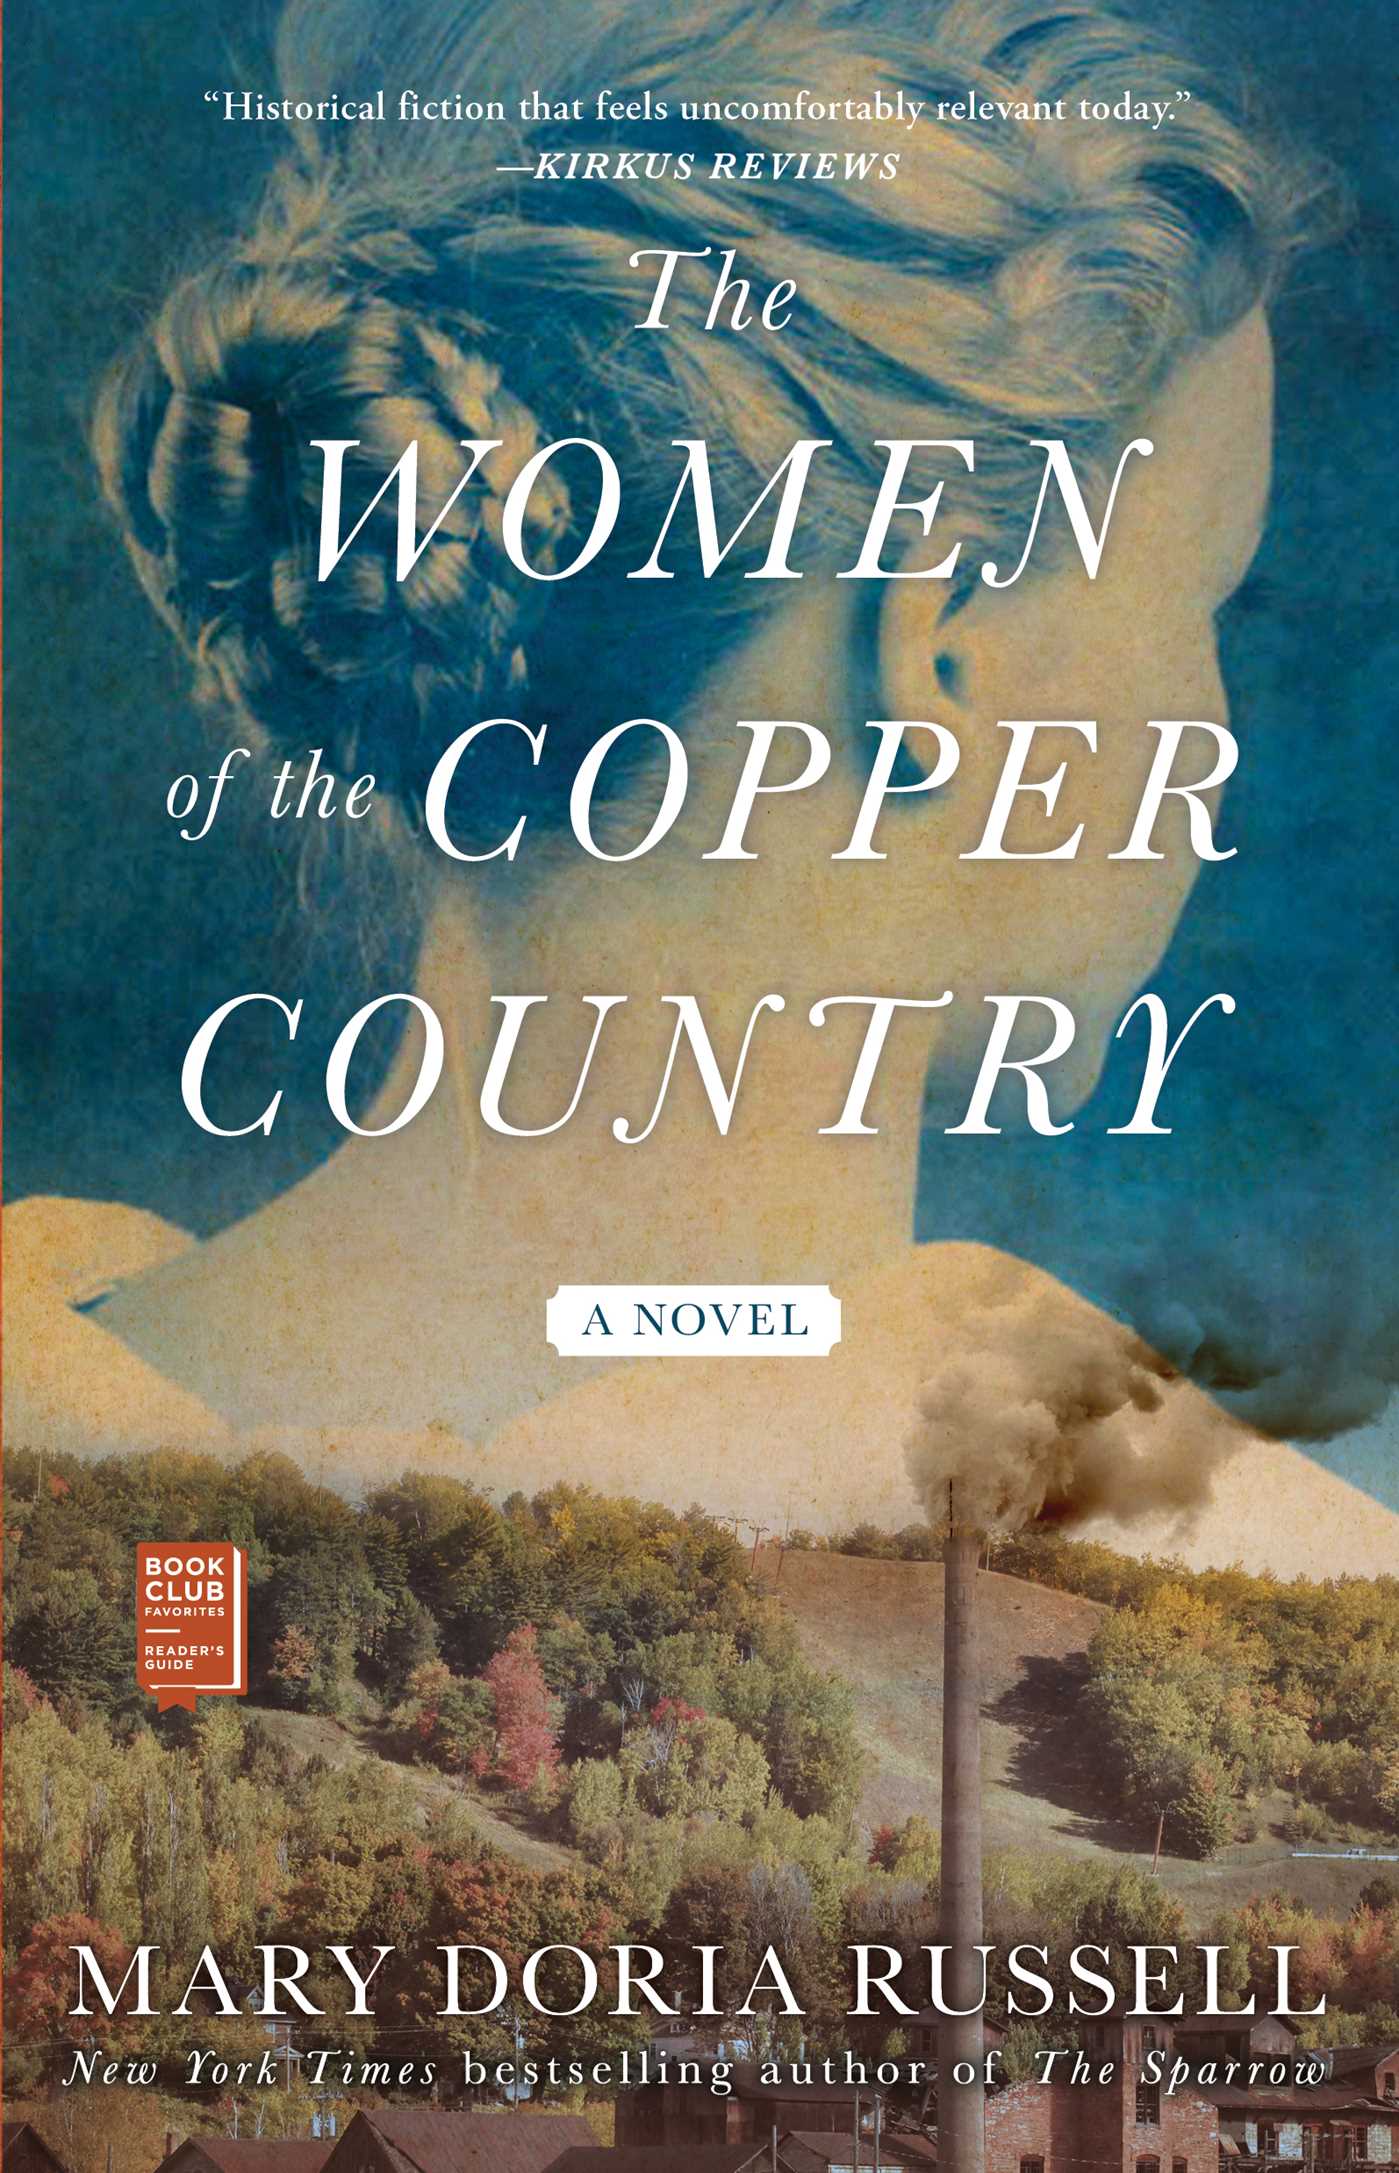 Cover of the book The Women of Copper Country. There is a silhouette of a woman transposed on top of a field of and expanse of trees with a factory in the forground.